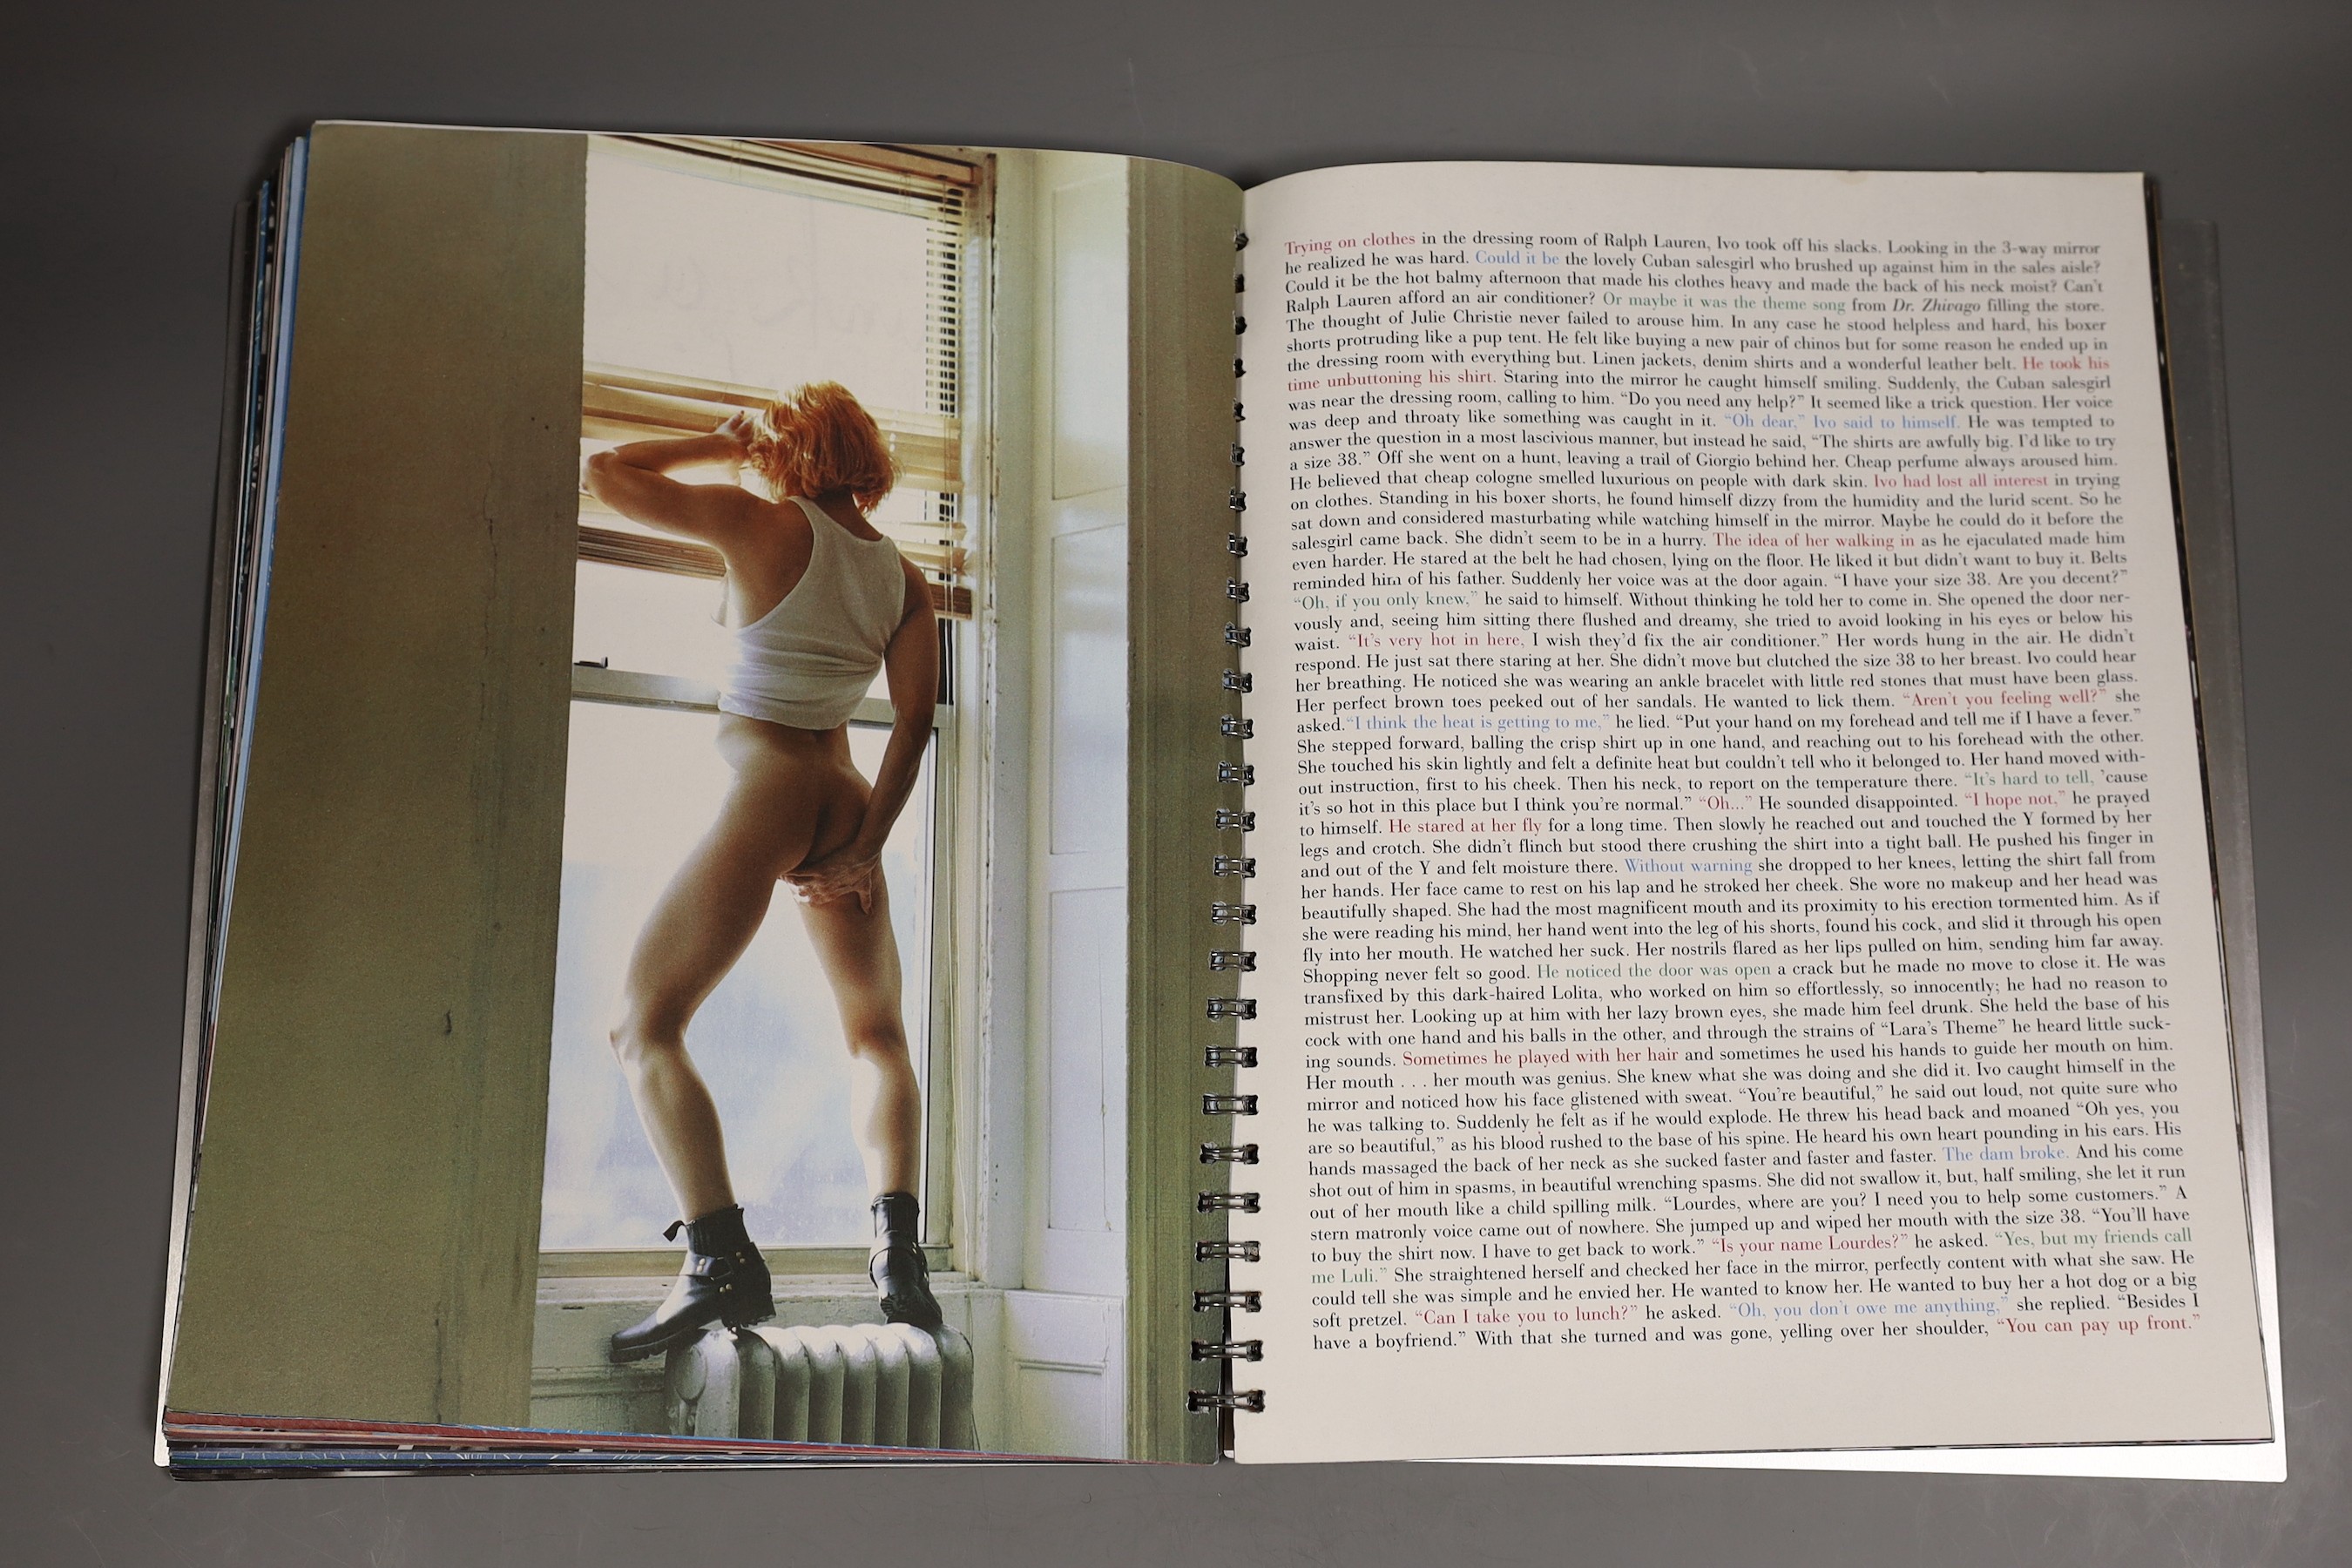 'Sex', by Madonna, photographed by Steven Meisel, art directed by Fabien Baron, edited by Glenn O’ - Image 5 of 5